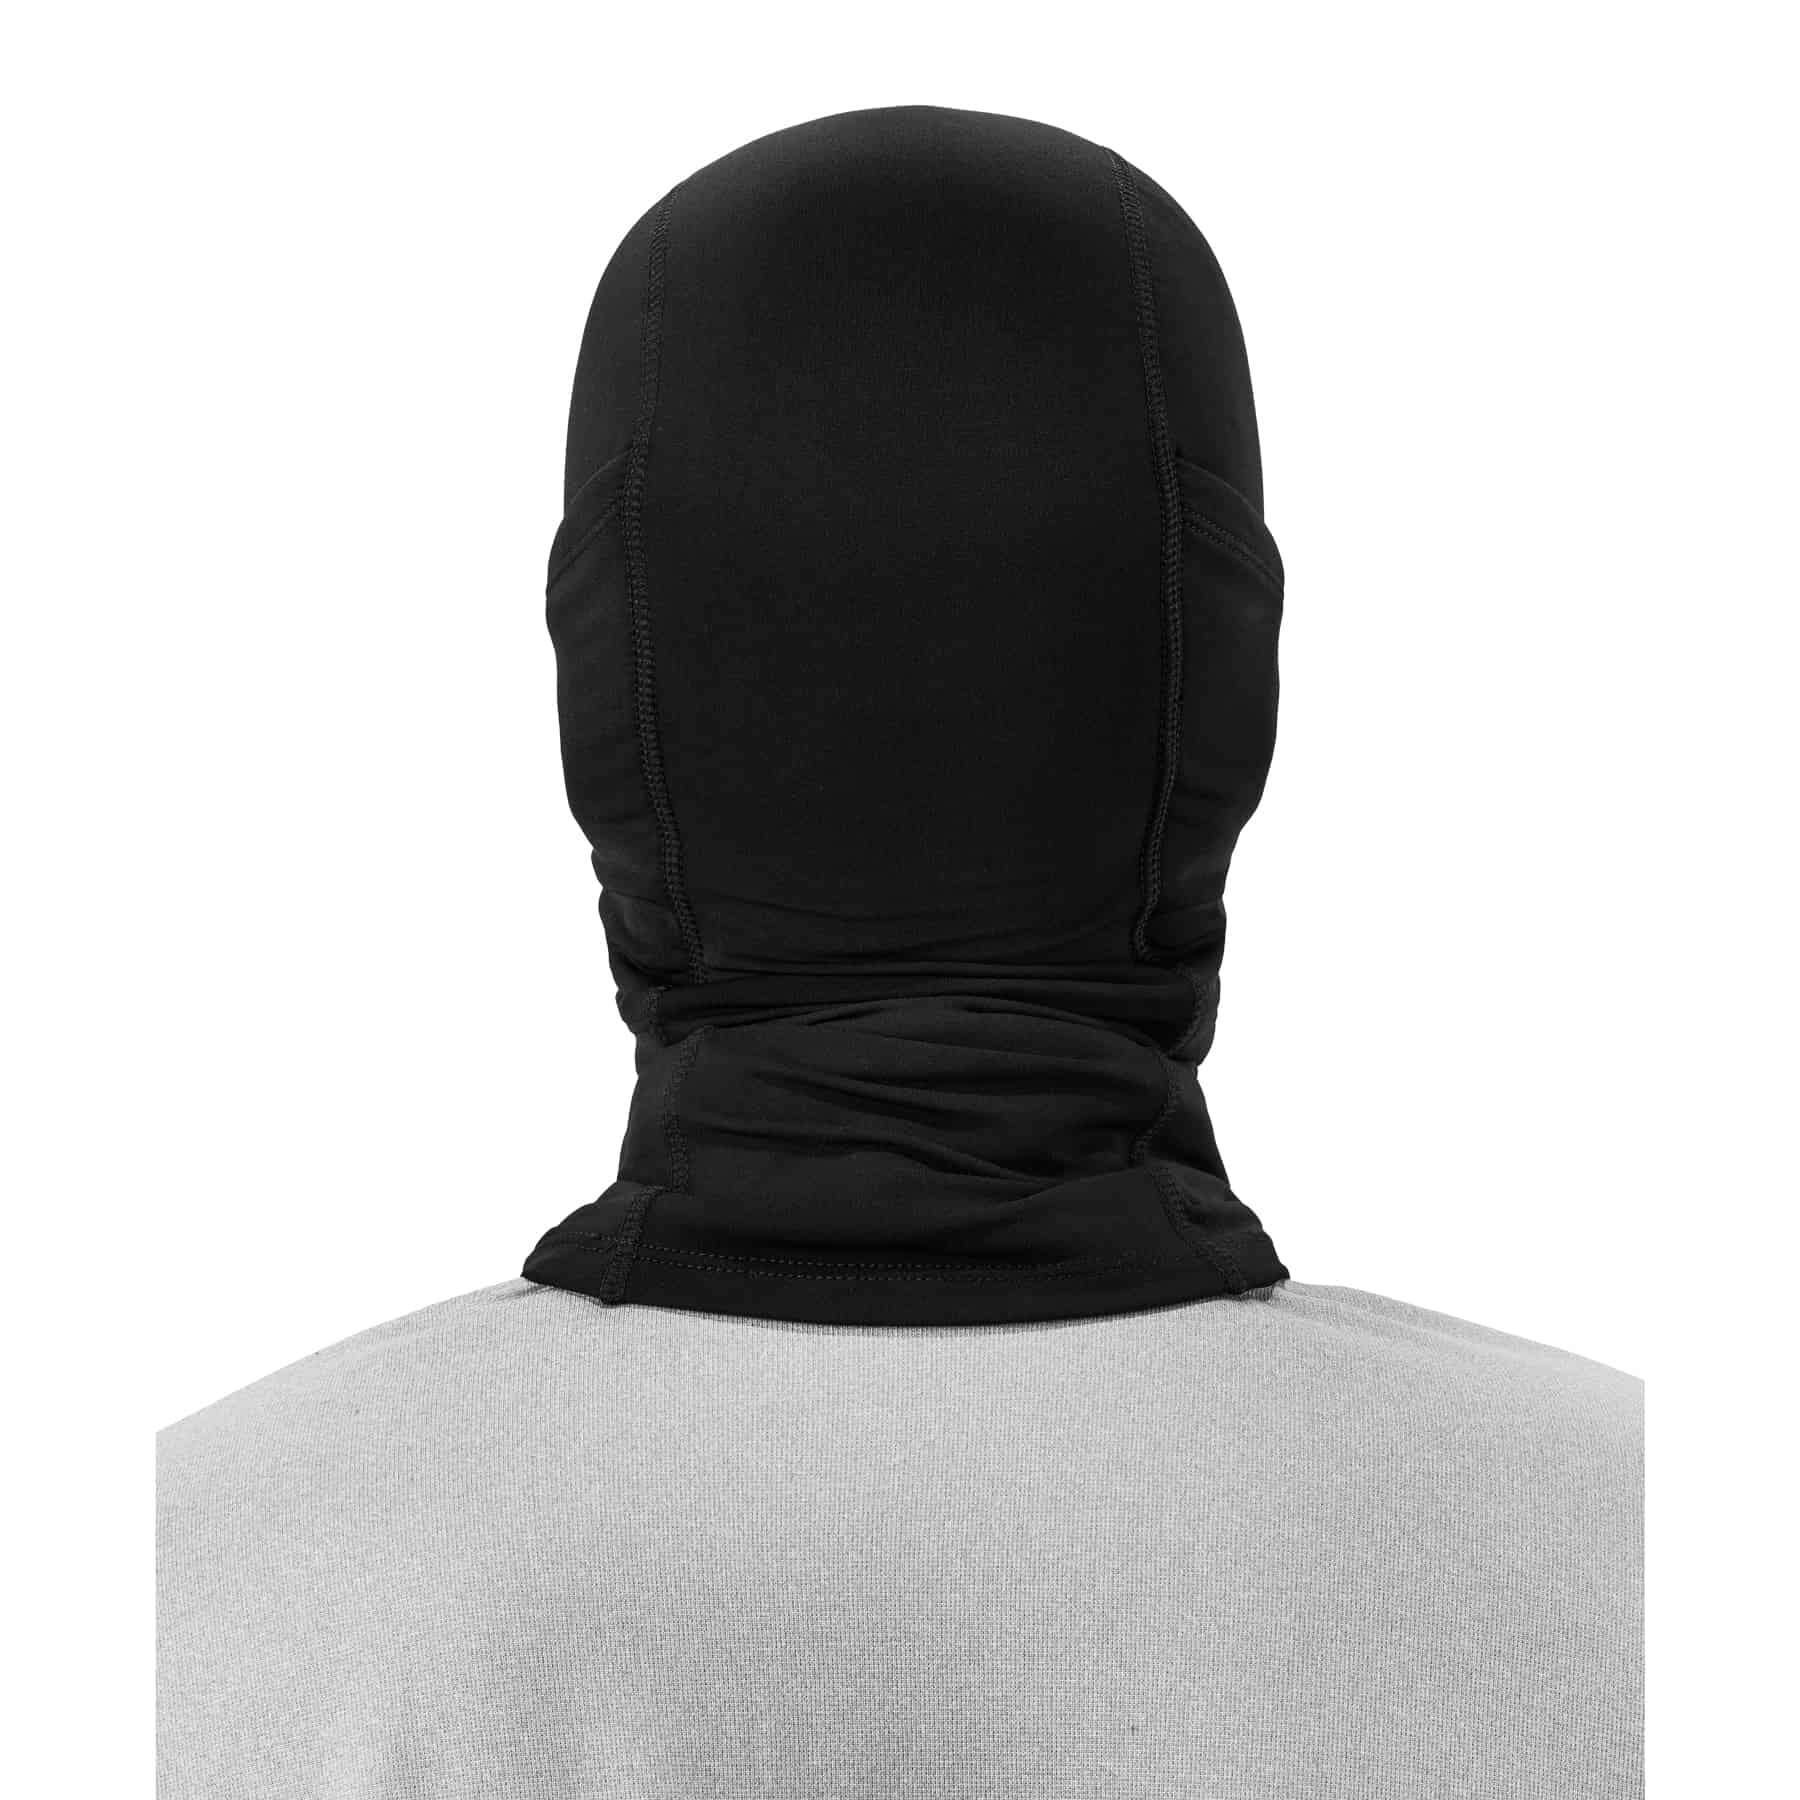 Tofern Half Face Mask Breathable Soft Face Cover Multifunctional Stretchable Balaclava 